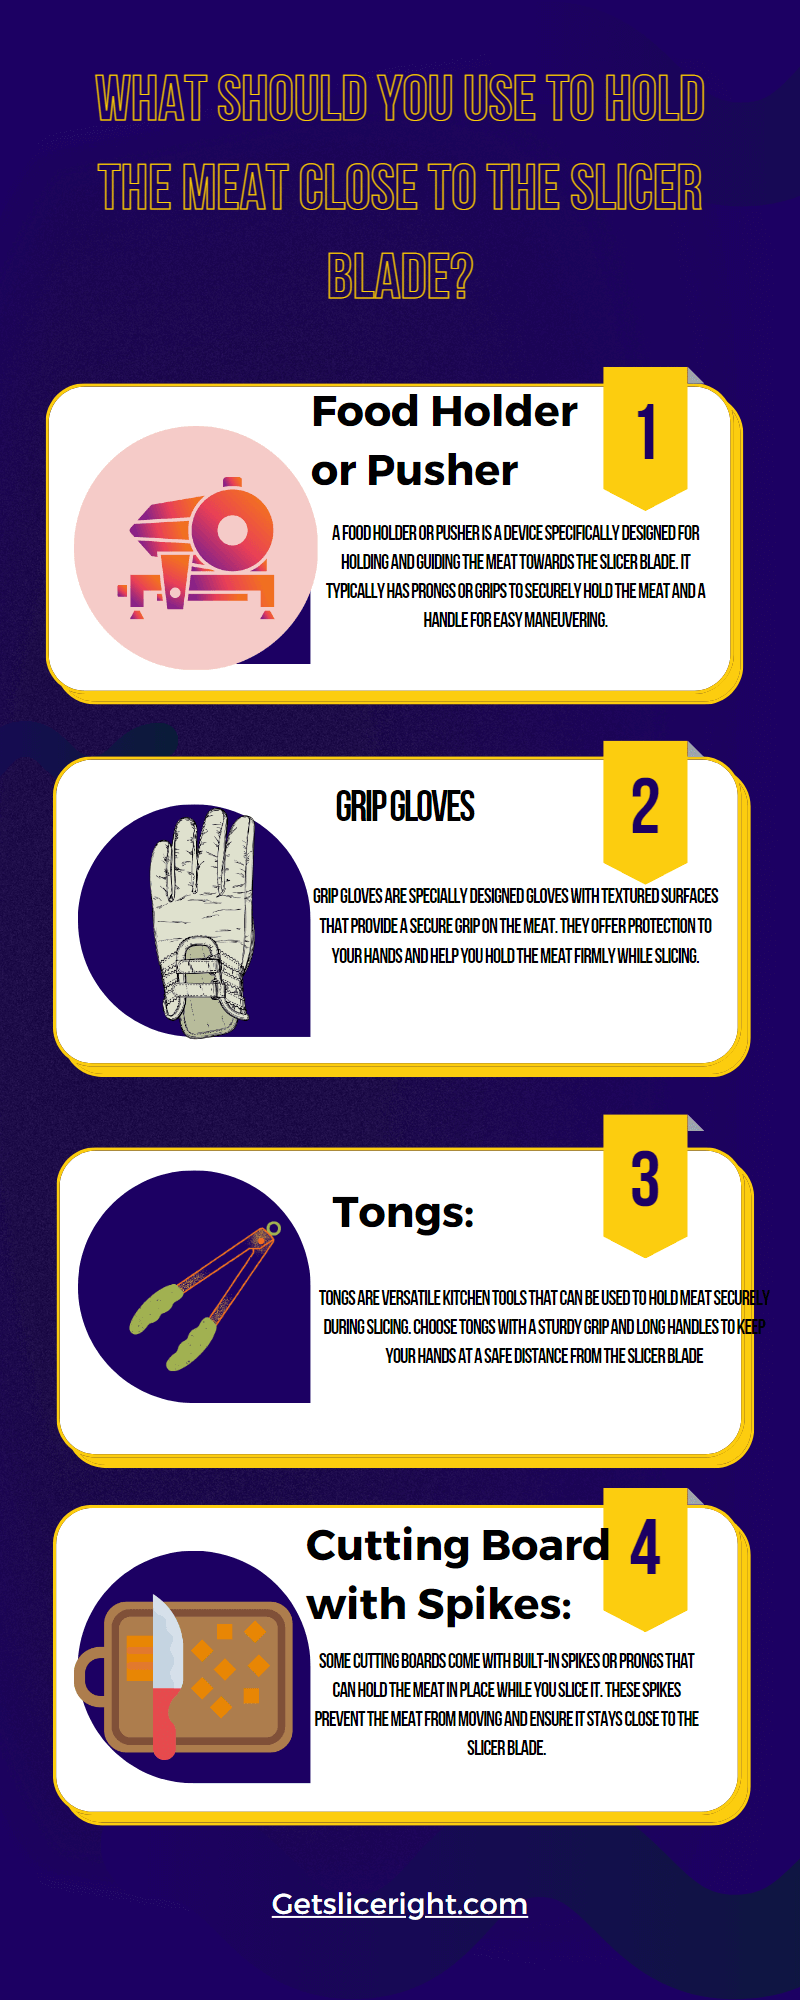 What should you do to hold the meat close to the slicer blade - Getsliceright Infographic